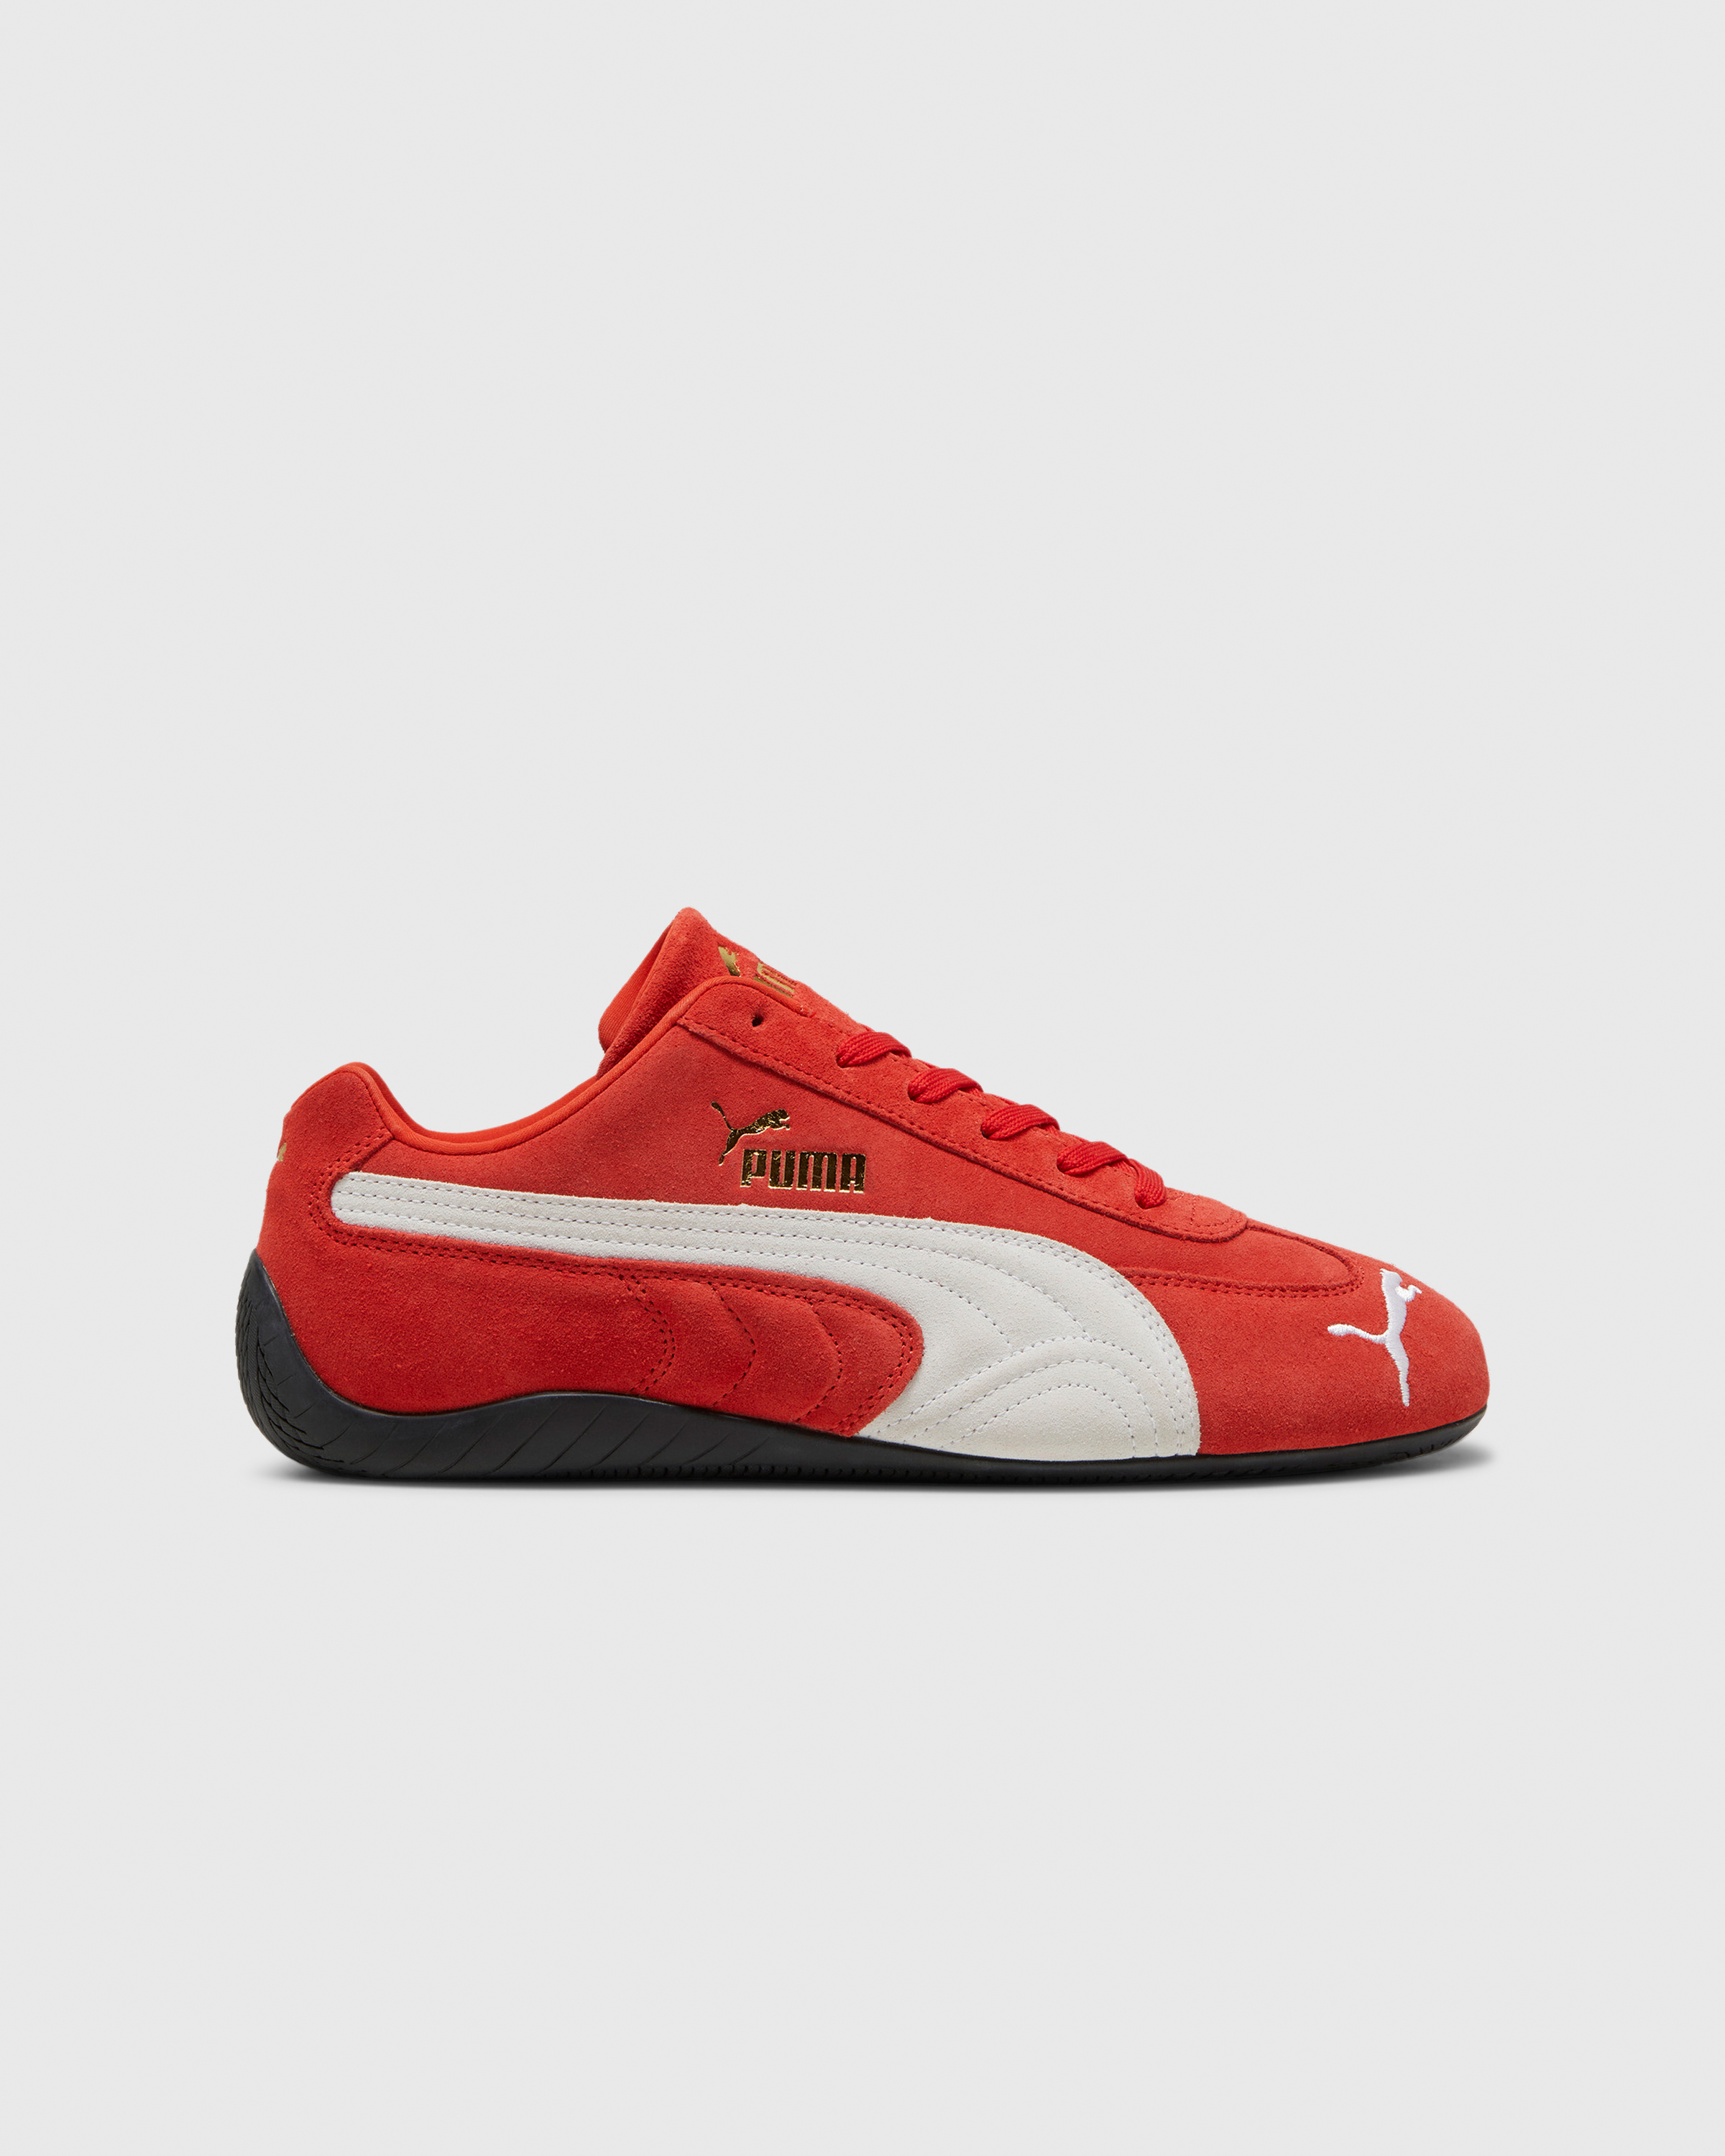 Puma – Speedcat OG Red/White - Low Top Sneakers - Red - Image 1